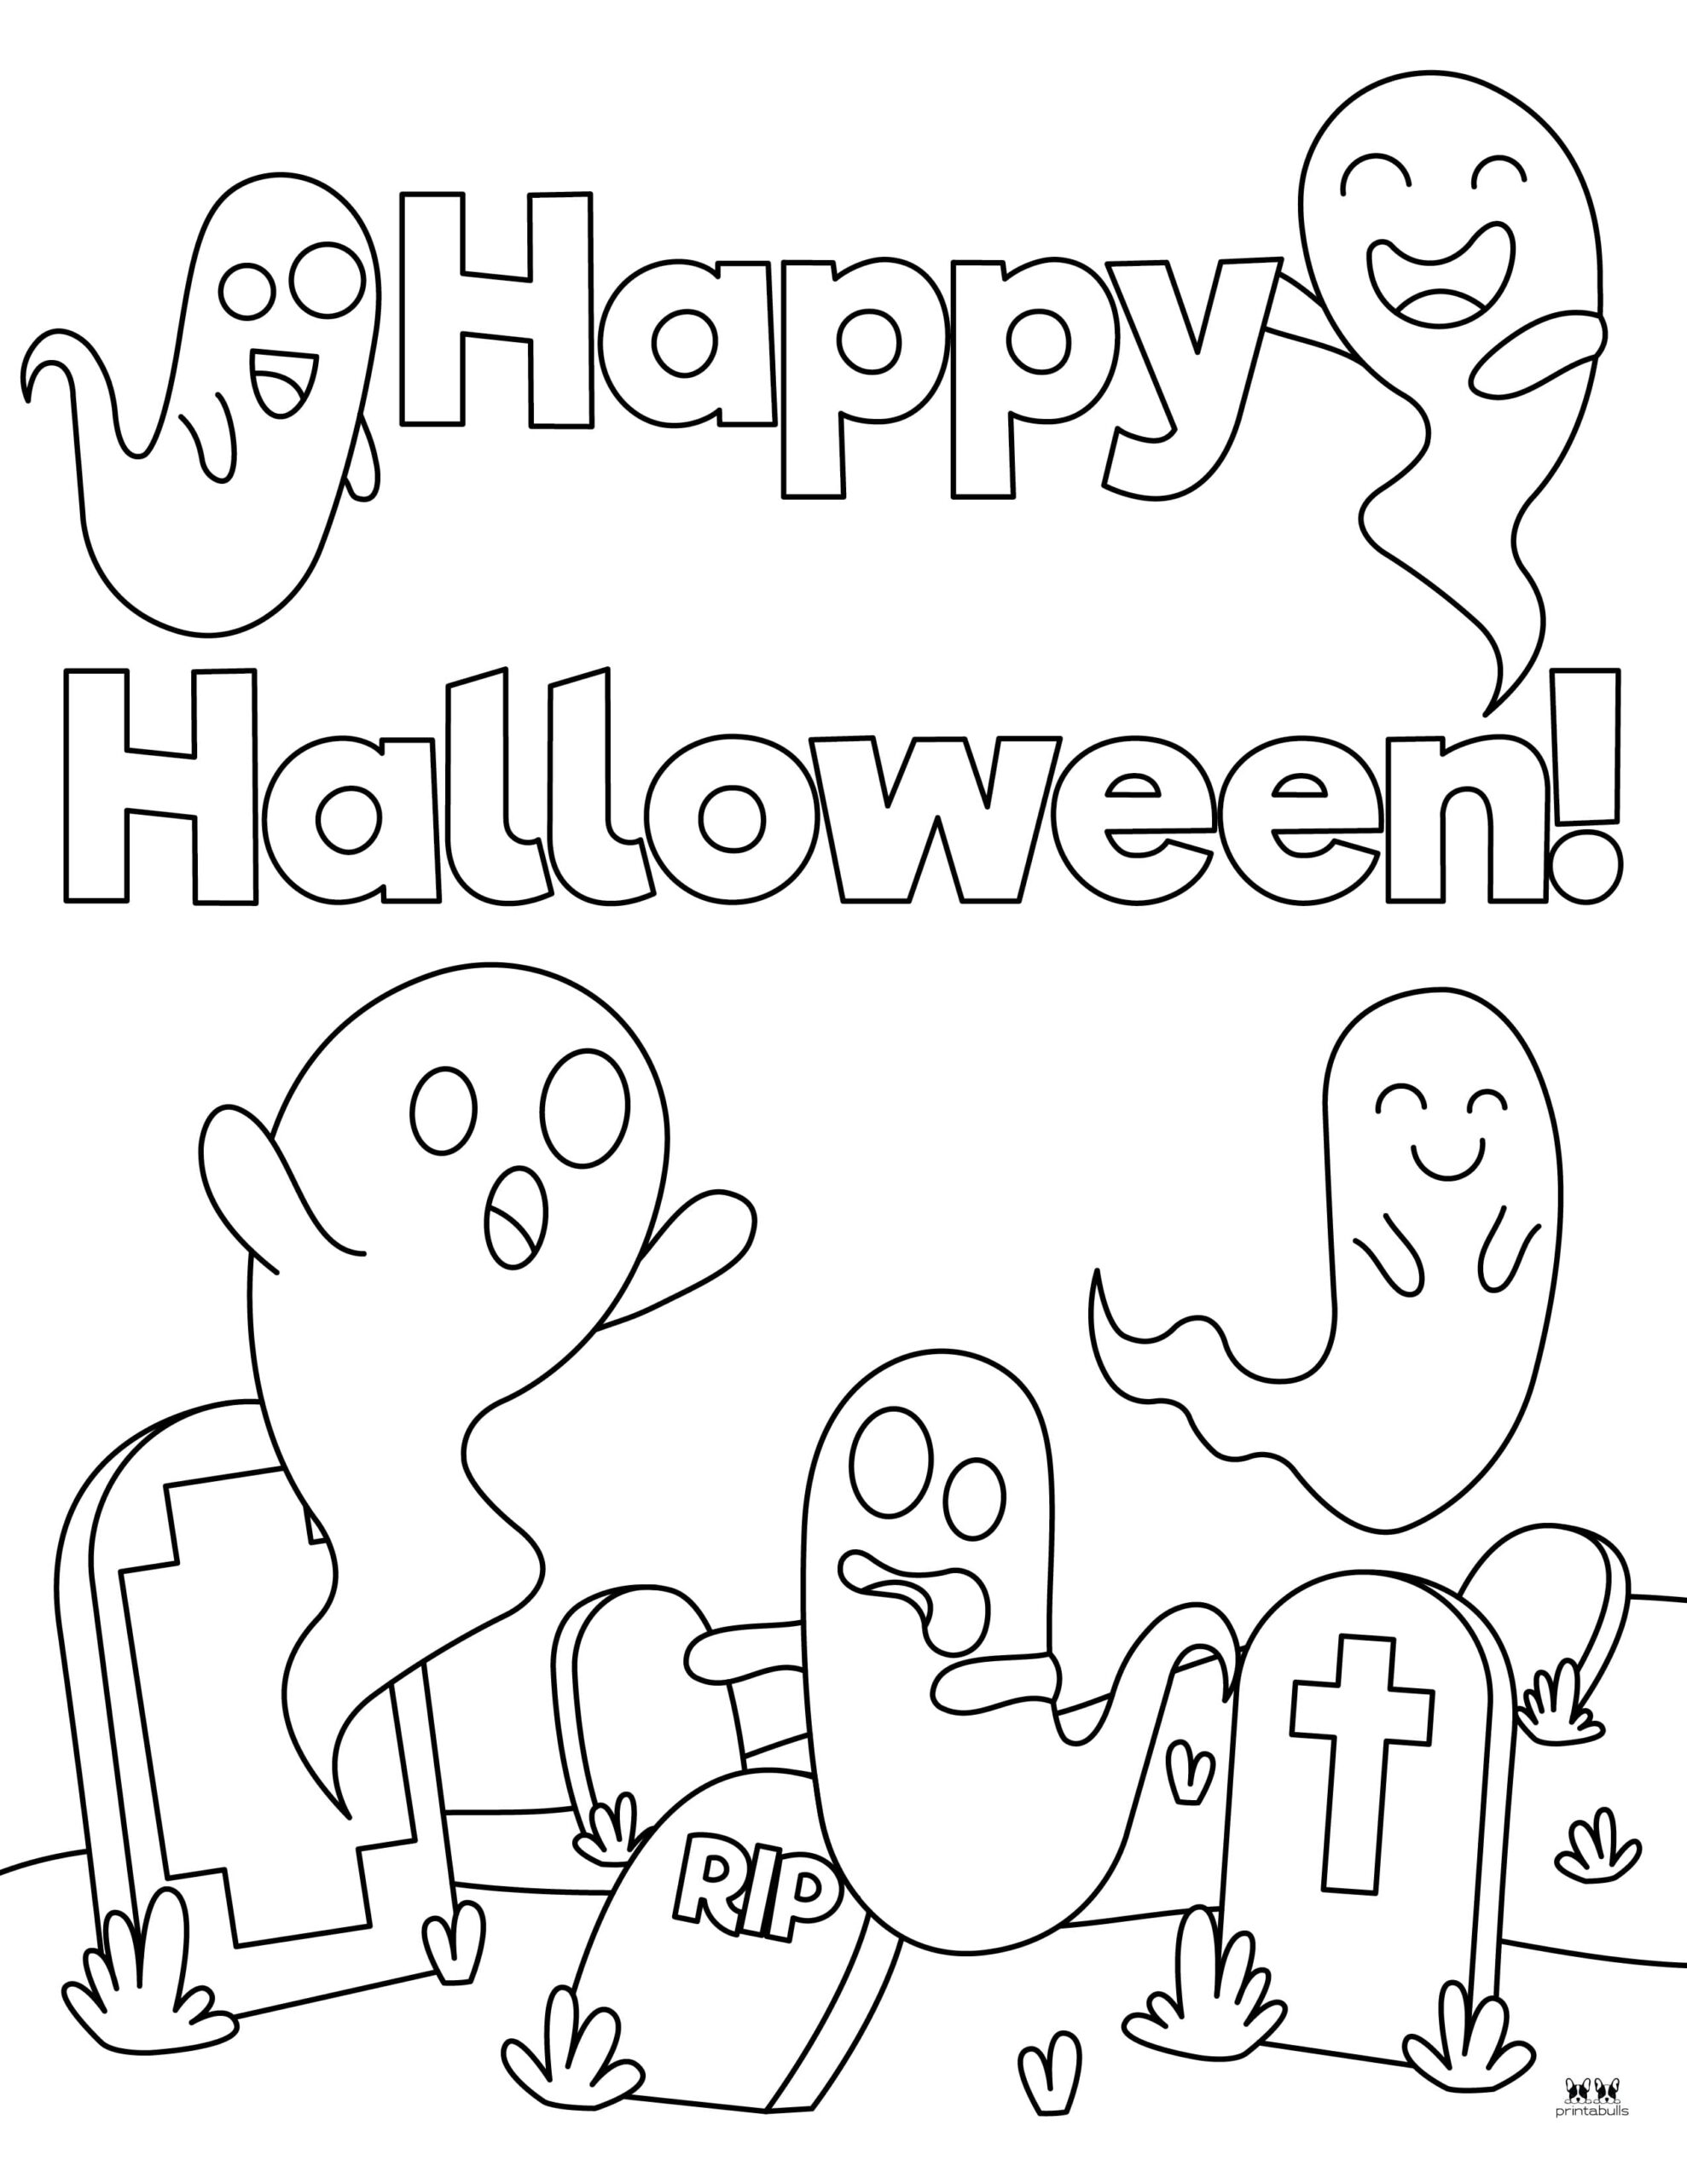 Happy Halloween Coloring Pages - 28 FREE Pages | Printabulls